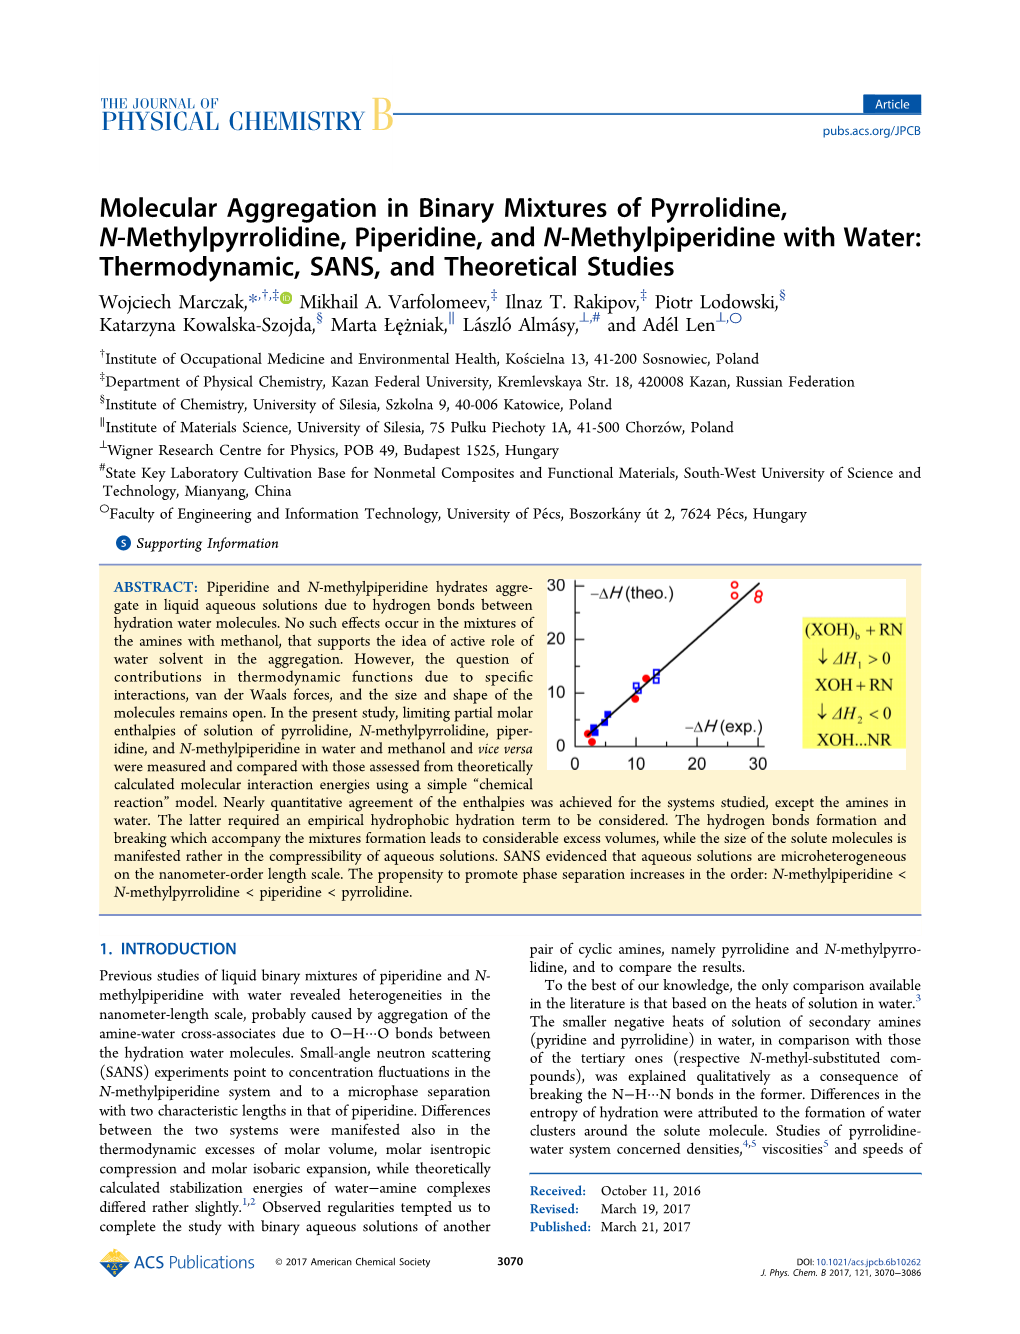 Molecular Aggregation in Binary Mixtures of Pyrrolidine, N‑Methylpyrrolidine, Piperidine, and N‑Methylpiperidine with Water